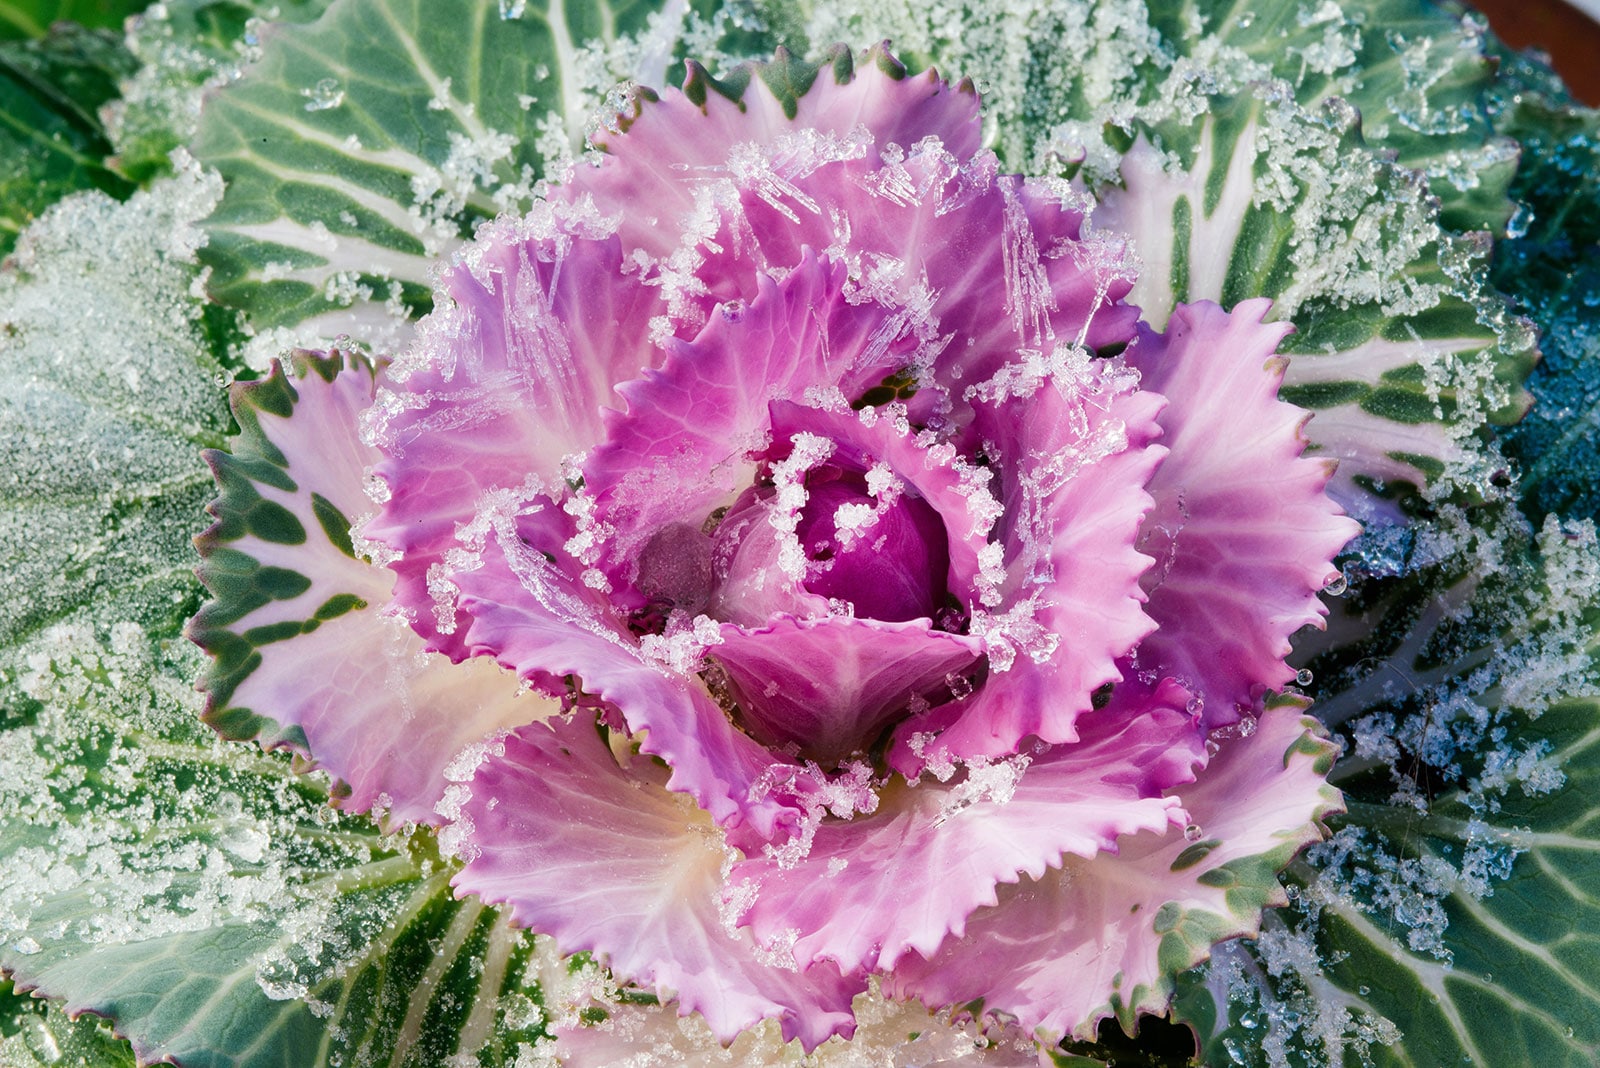 Close-up of a green and purple head of cabbage dusted with snow crystals